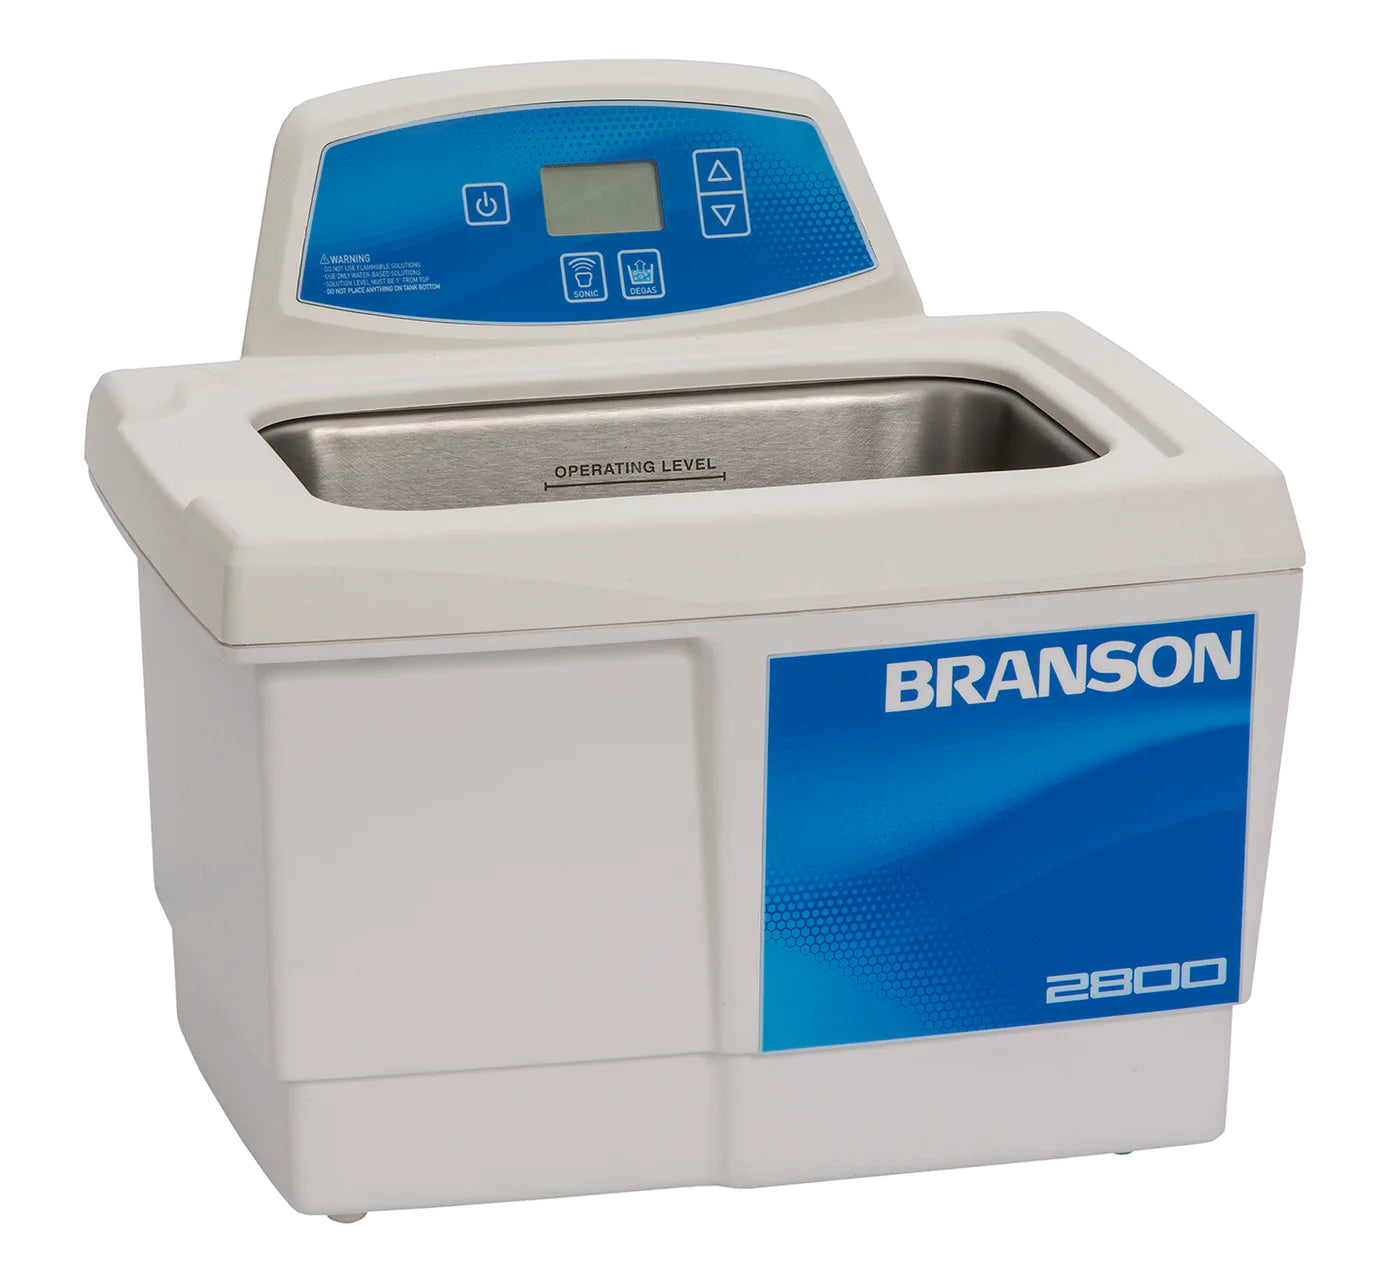 stainless-steel-mesh-basket-for-branson-1500-1800-ultrasonic-cleaners-100-916-333